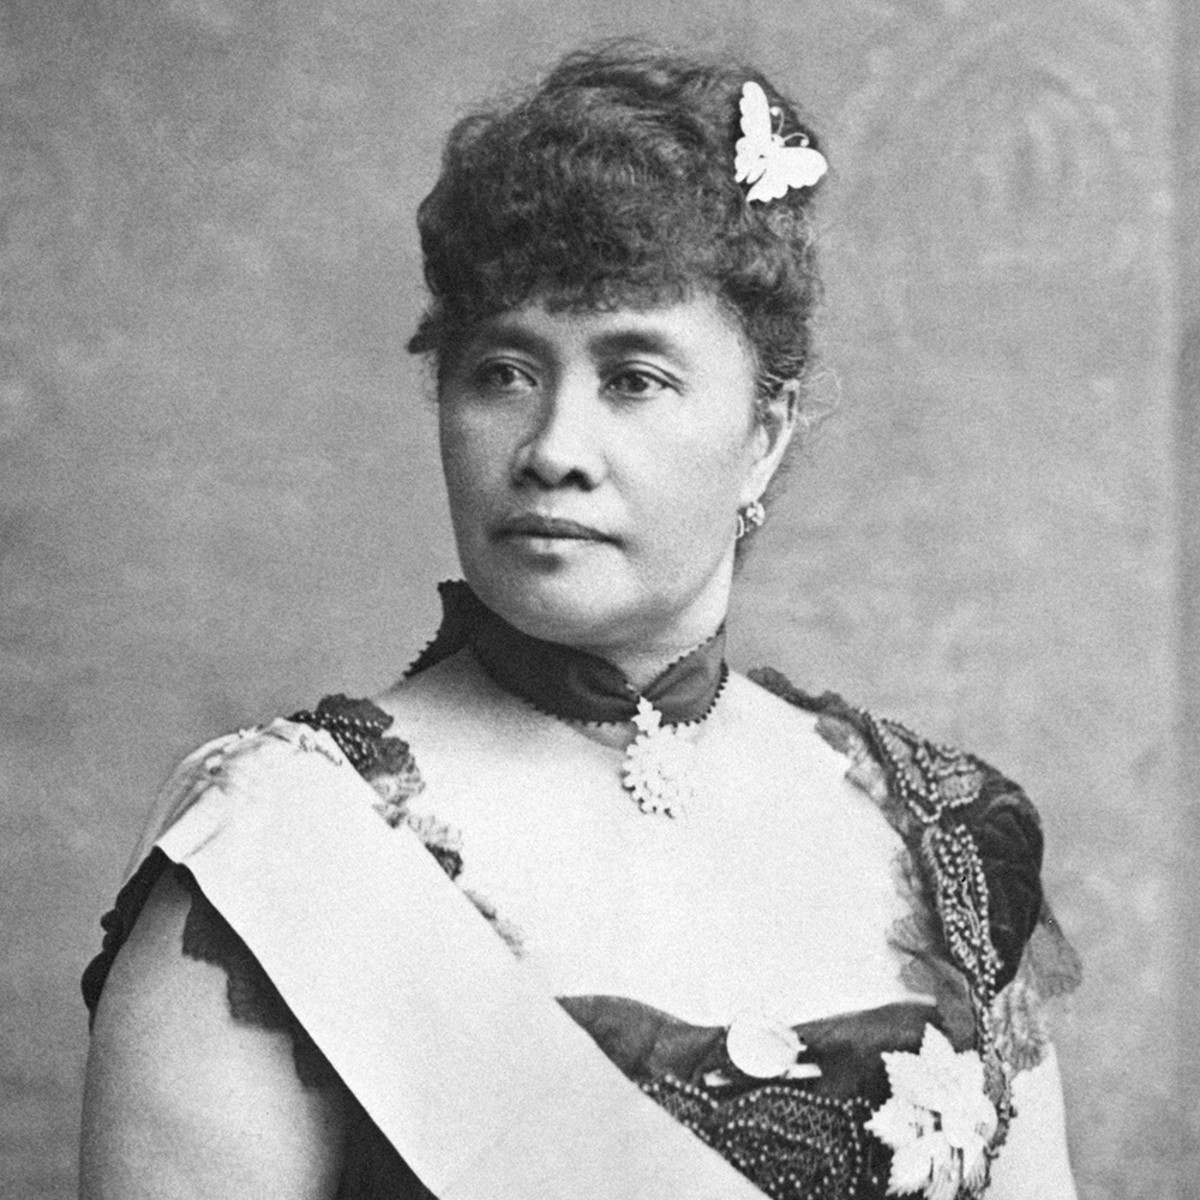 <p>The queen of Hawaii, deposed in an 1893 coup after she tried to make a new constitution replacing the Bayonet Constitution and restoring political power and votes to native hawaiians. She worked to fight annexation by the U.S., restore the power of the monarchy, and reclaim voting rights for her people using nonviolent forms of resistance such as appealing to the laws of the Bayonet Constitution. Most histories of the annexation focused on the accounts of the perpetrators of the coup and English language newspapers, framing her as incompetent using black steryotypes, and minimizing her resistance.</p>